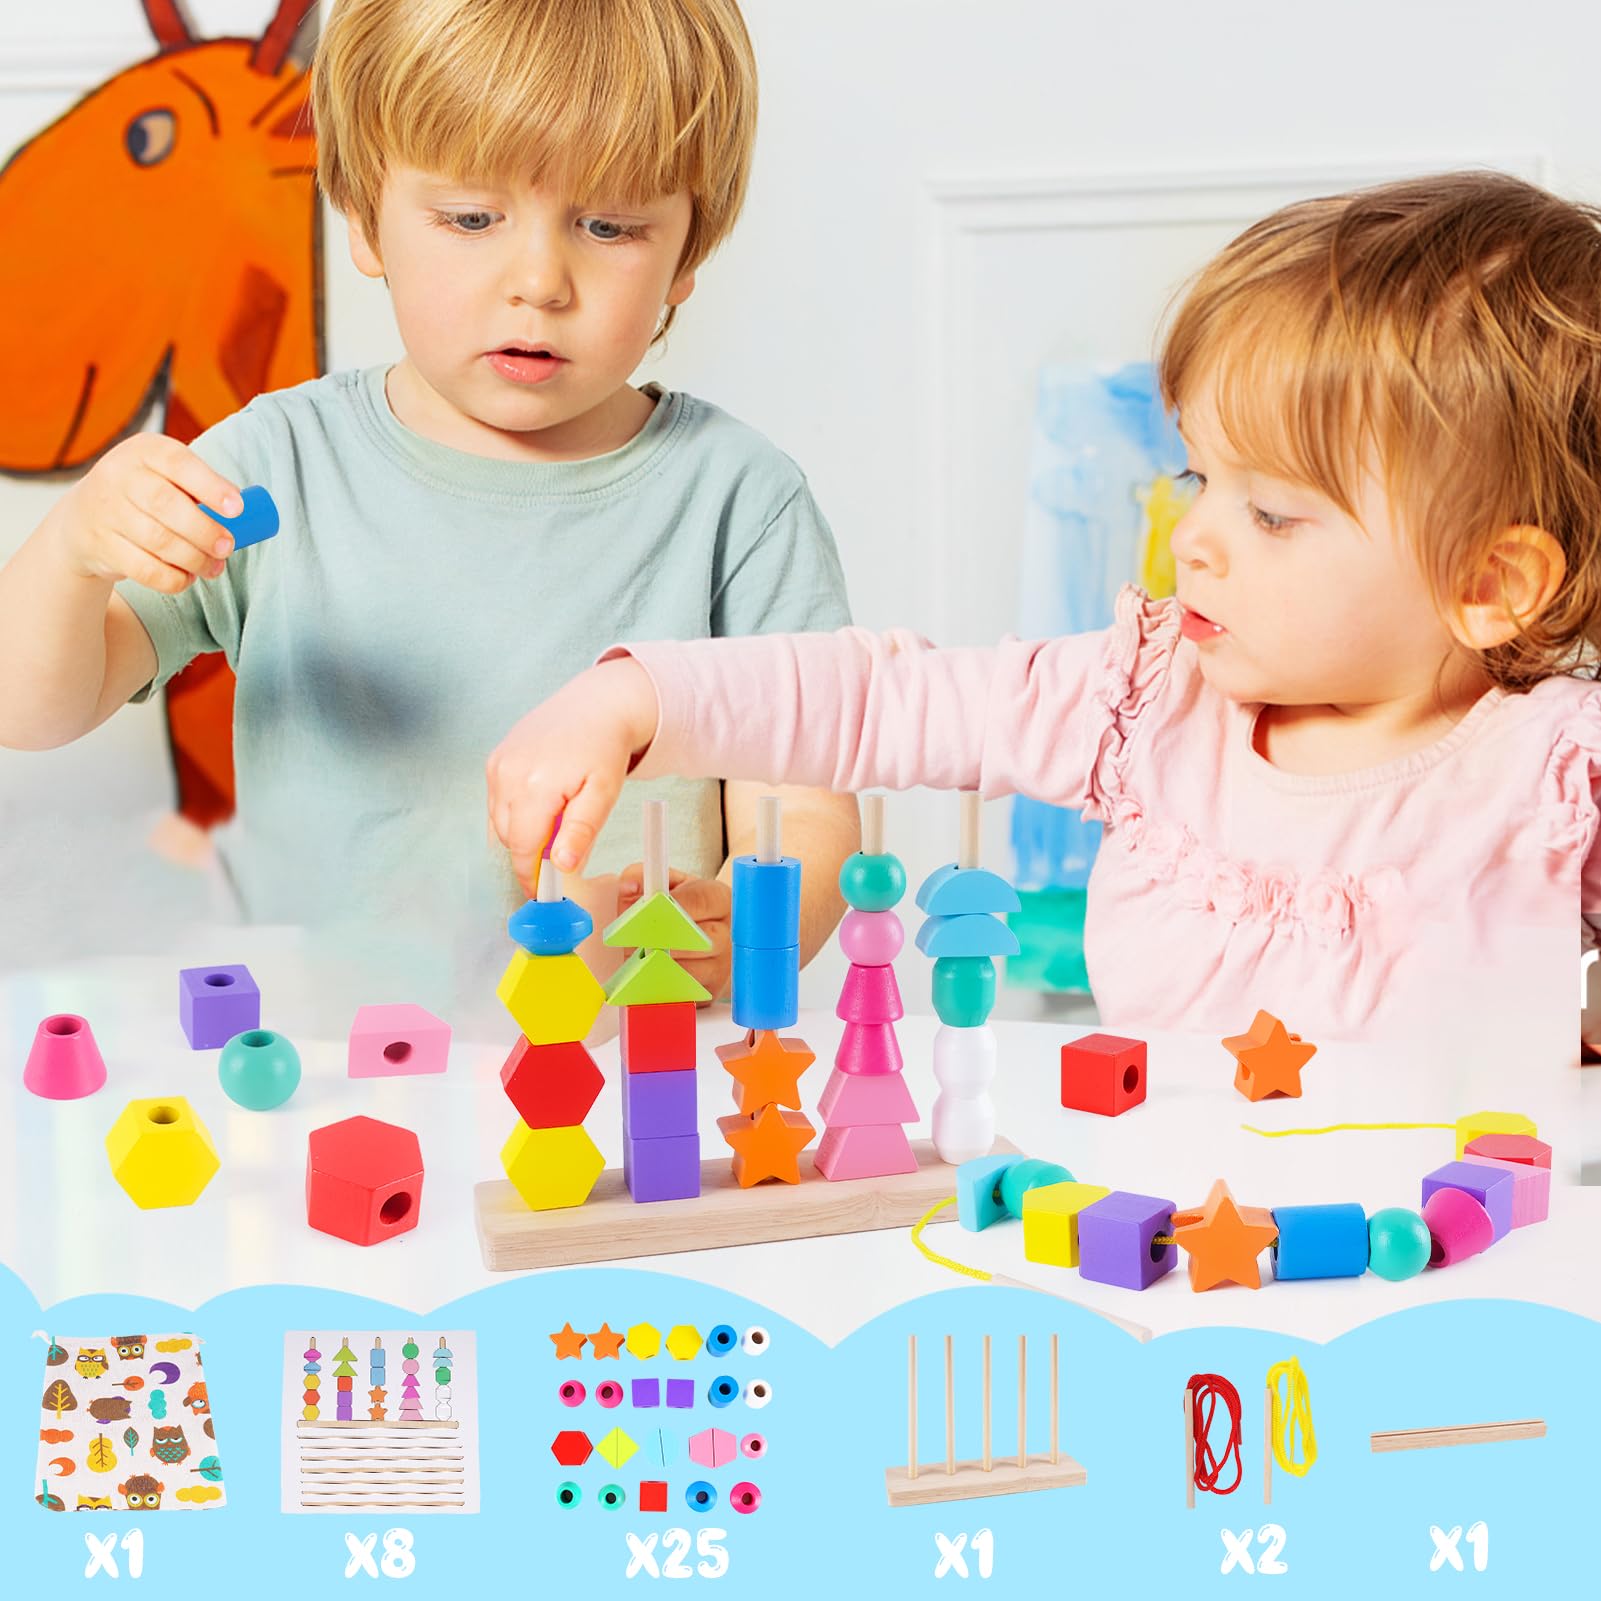 Toddler Montessori Toys Wooden Beads Sequencing Toy Set, Stacking Blocks, Matching Shapes, Lacing Beads, Shape Sorter Toys for 2 3 4 5 Year Old Boys Girls, STEM Preschool Learning Toys Gifts for Kids